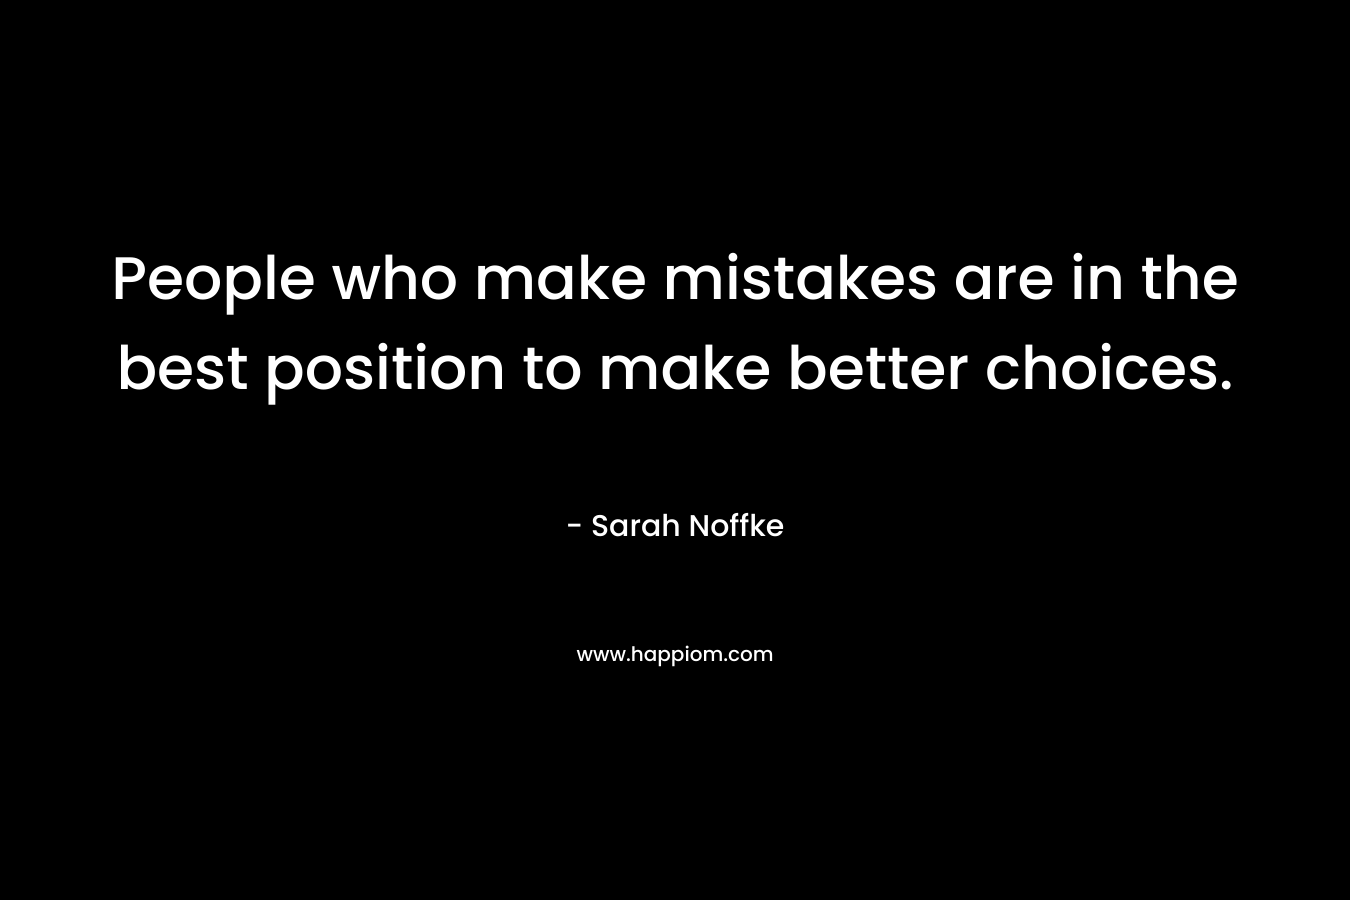 People who make mistakes are in the best position to make better choices. – Sarah Noffke